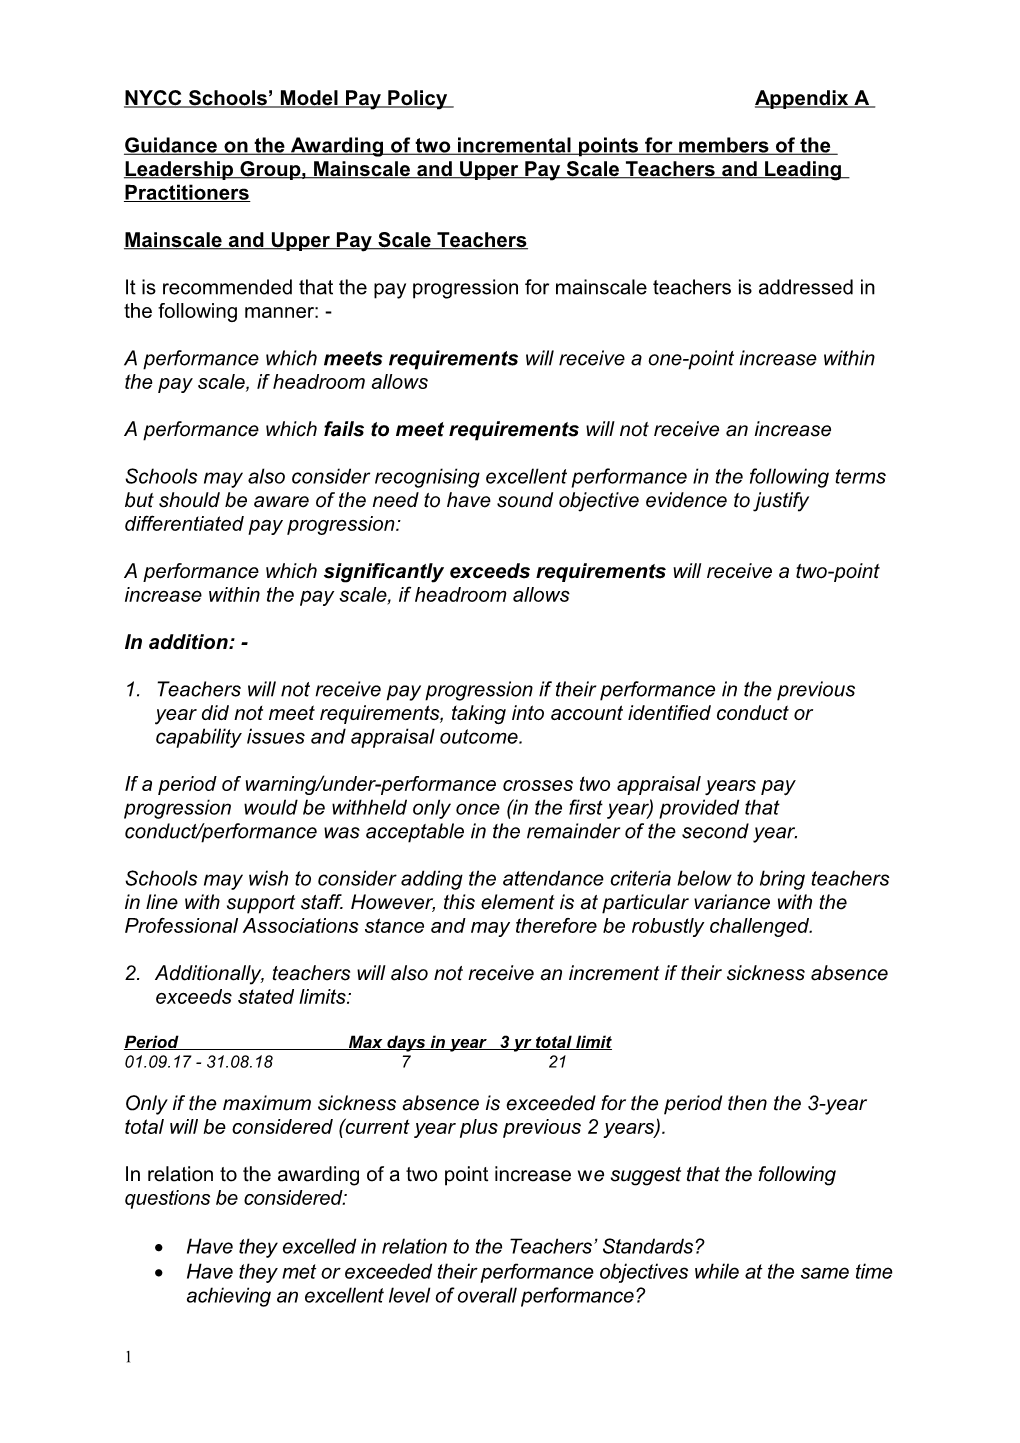 Model Schools' Pay Policy 2014-15